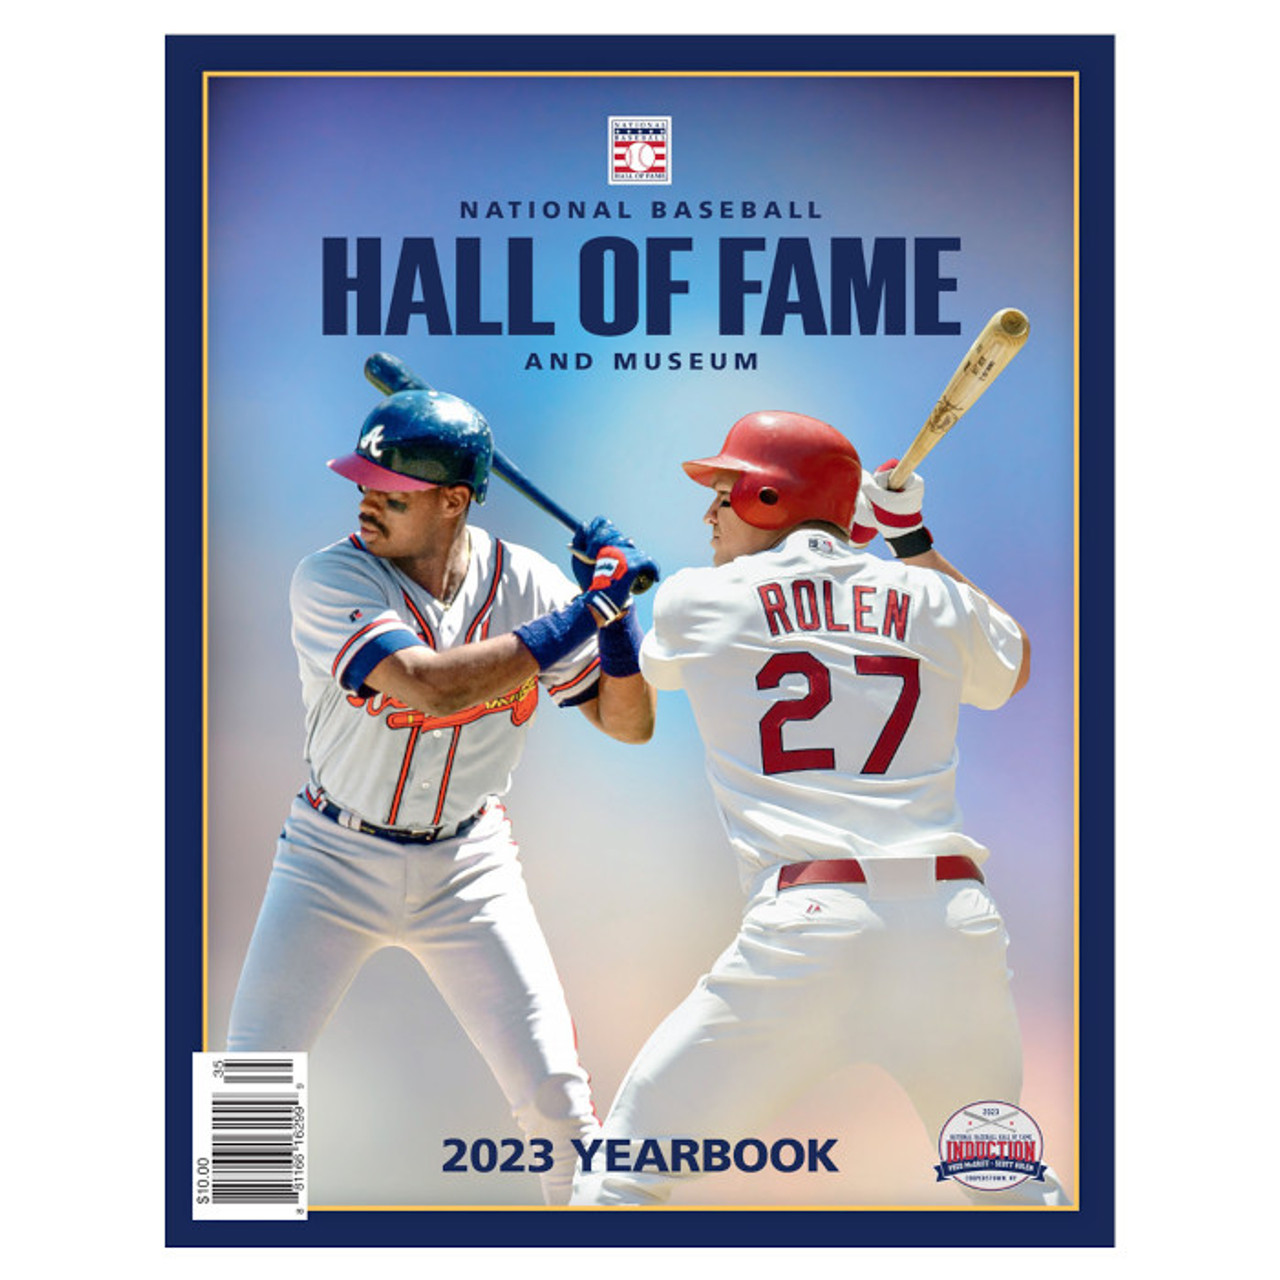 2023 Baseball Hall of Fame Yearbook